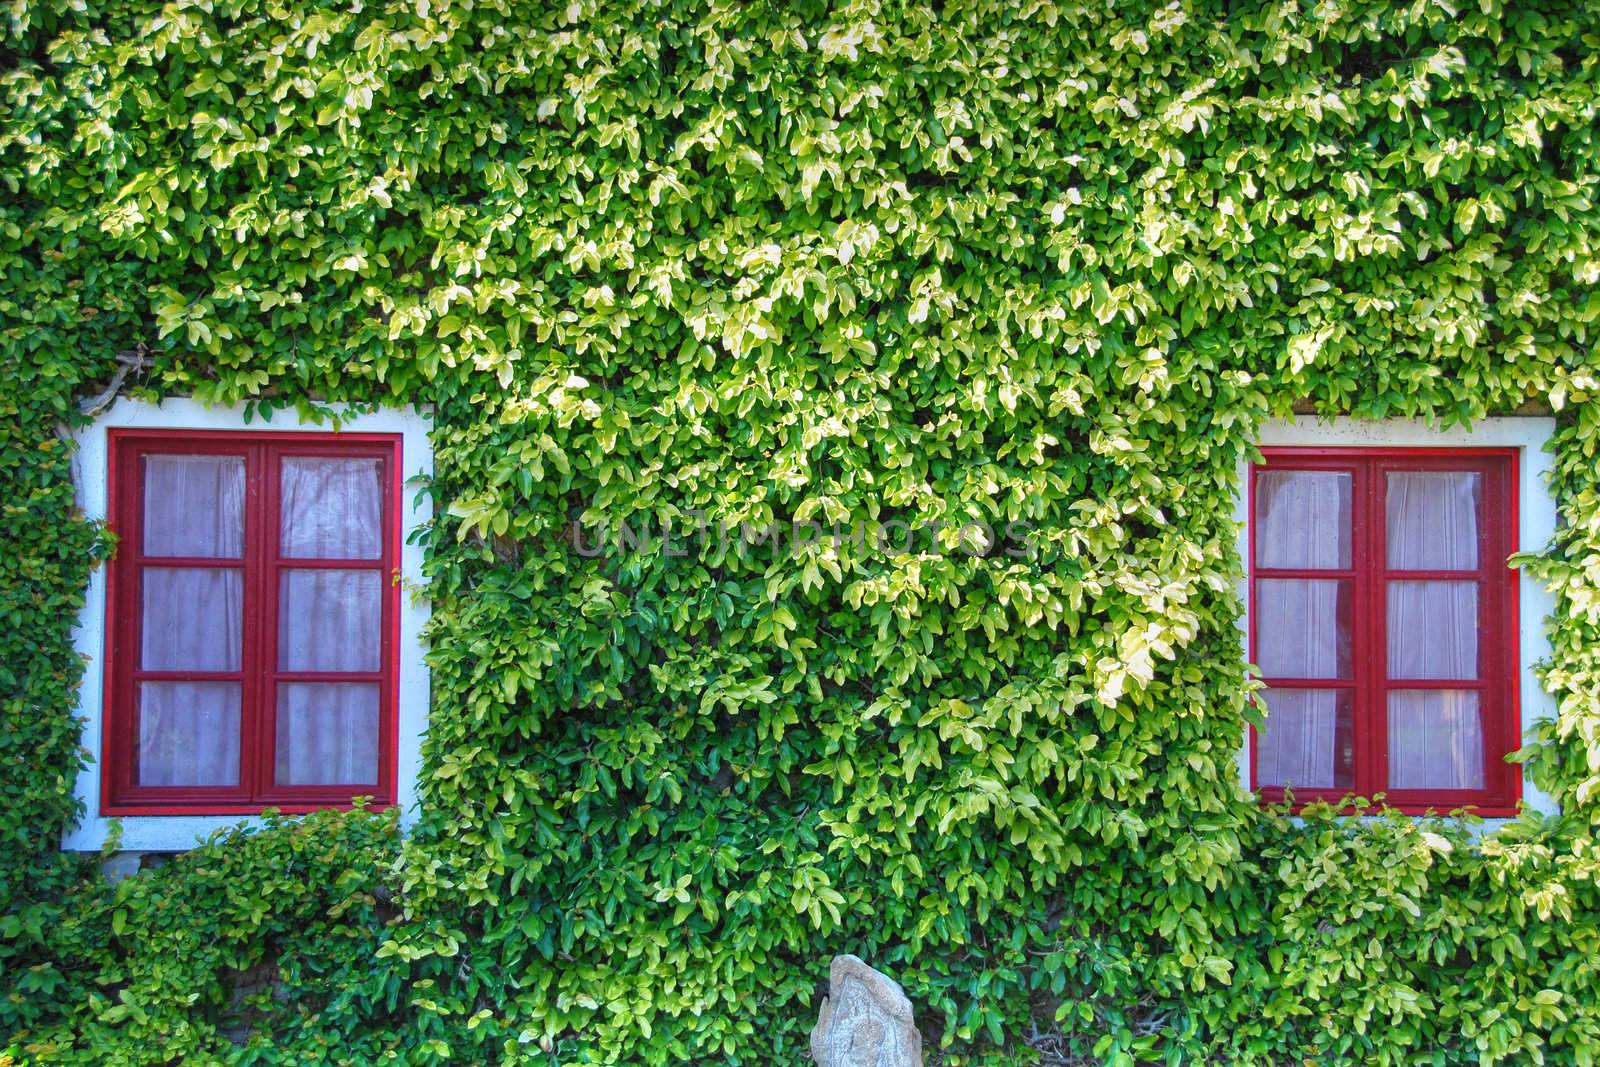 Red Windows in a Carpet of Green Leaves, Bolgheri, Italy, March by jovannig